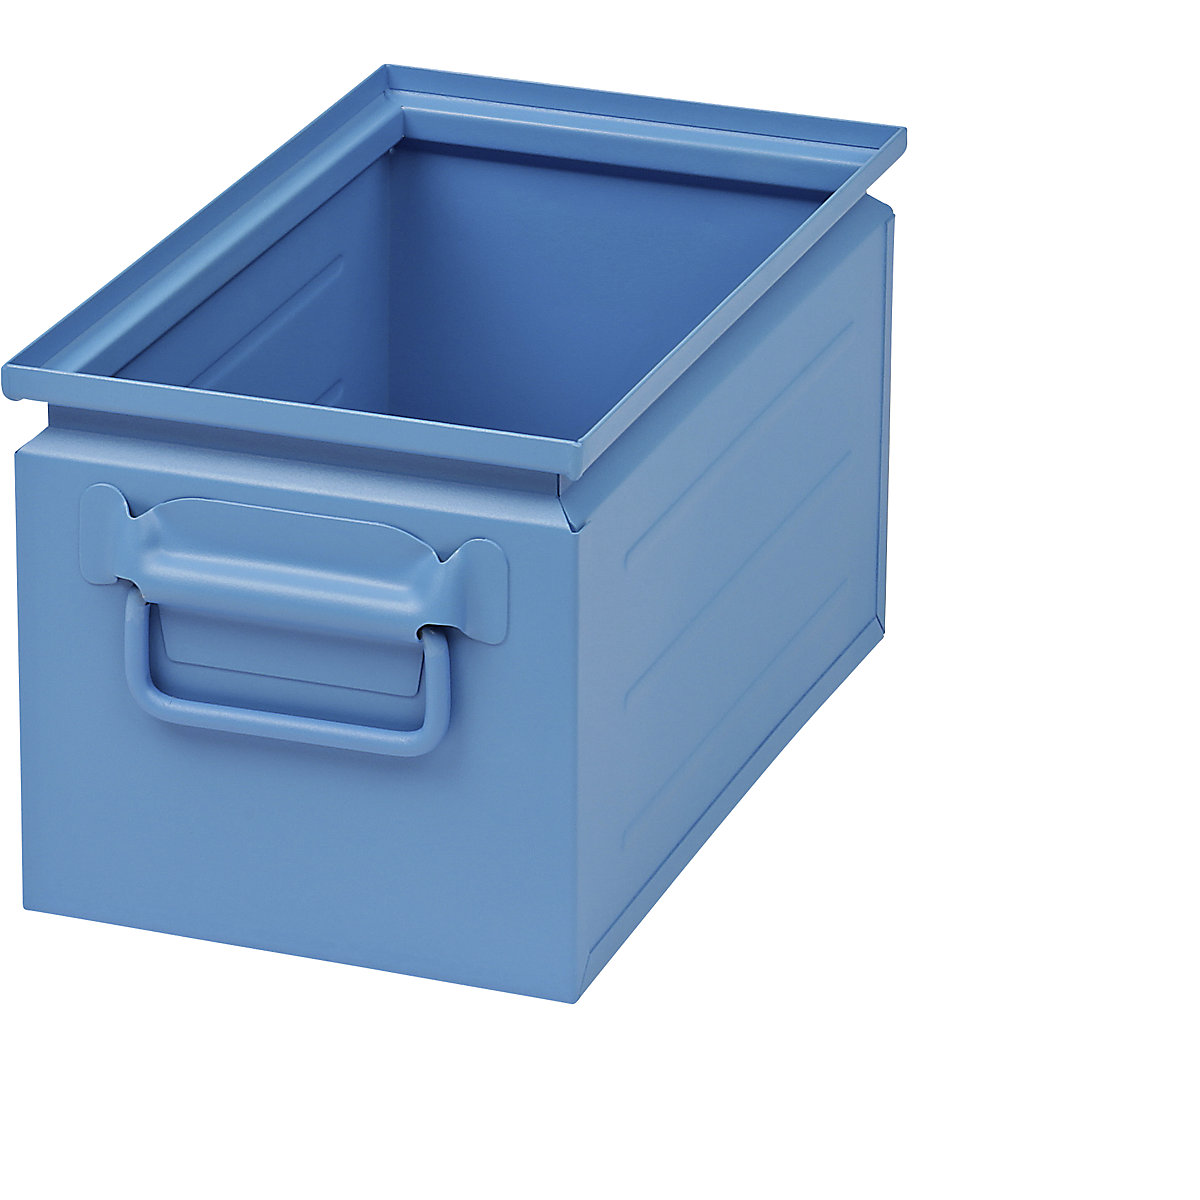 Stacking container made of sheet steel, capacity approx. 14 l, light blue RAL 5012-3